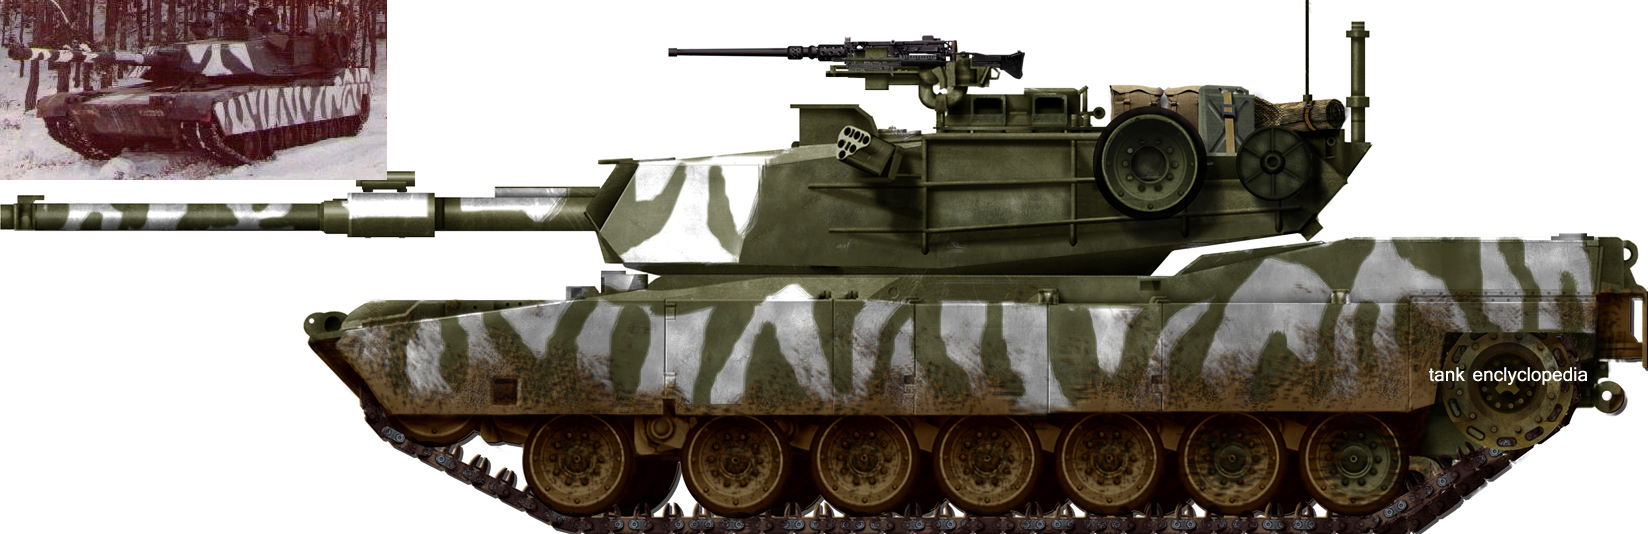 M1 from the Delta Company, 1st Batallion, 64th Armor, 3rd Infantry Division, Germany.